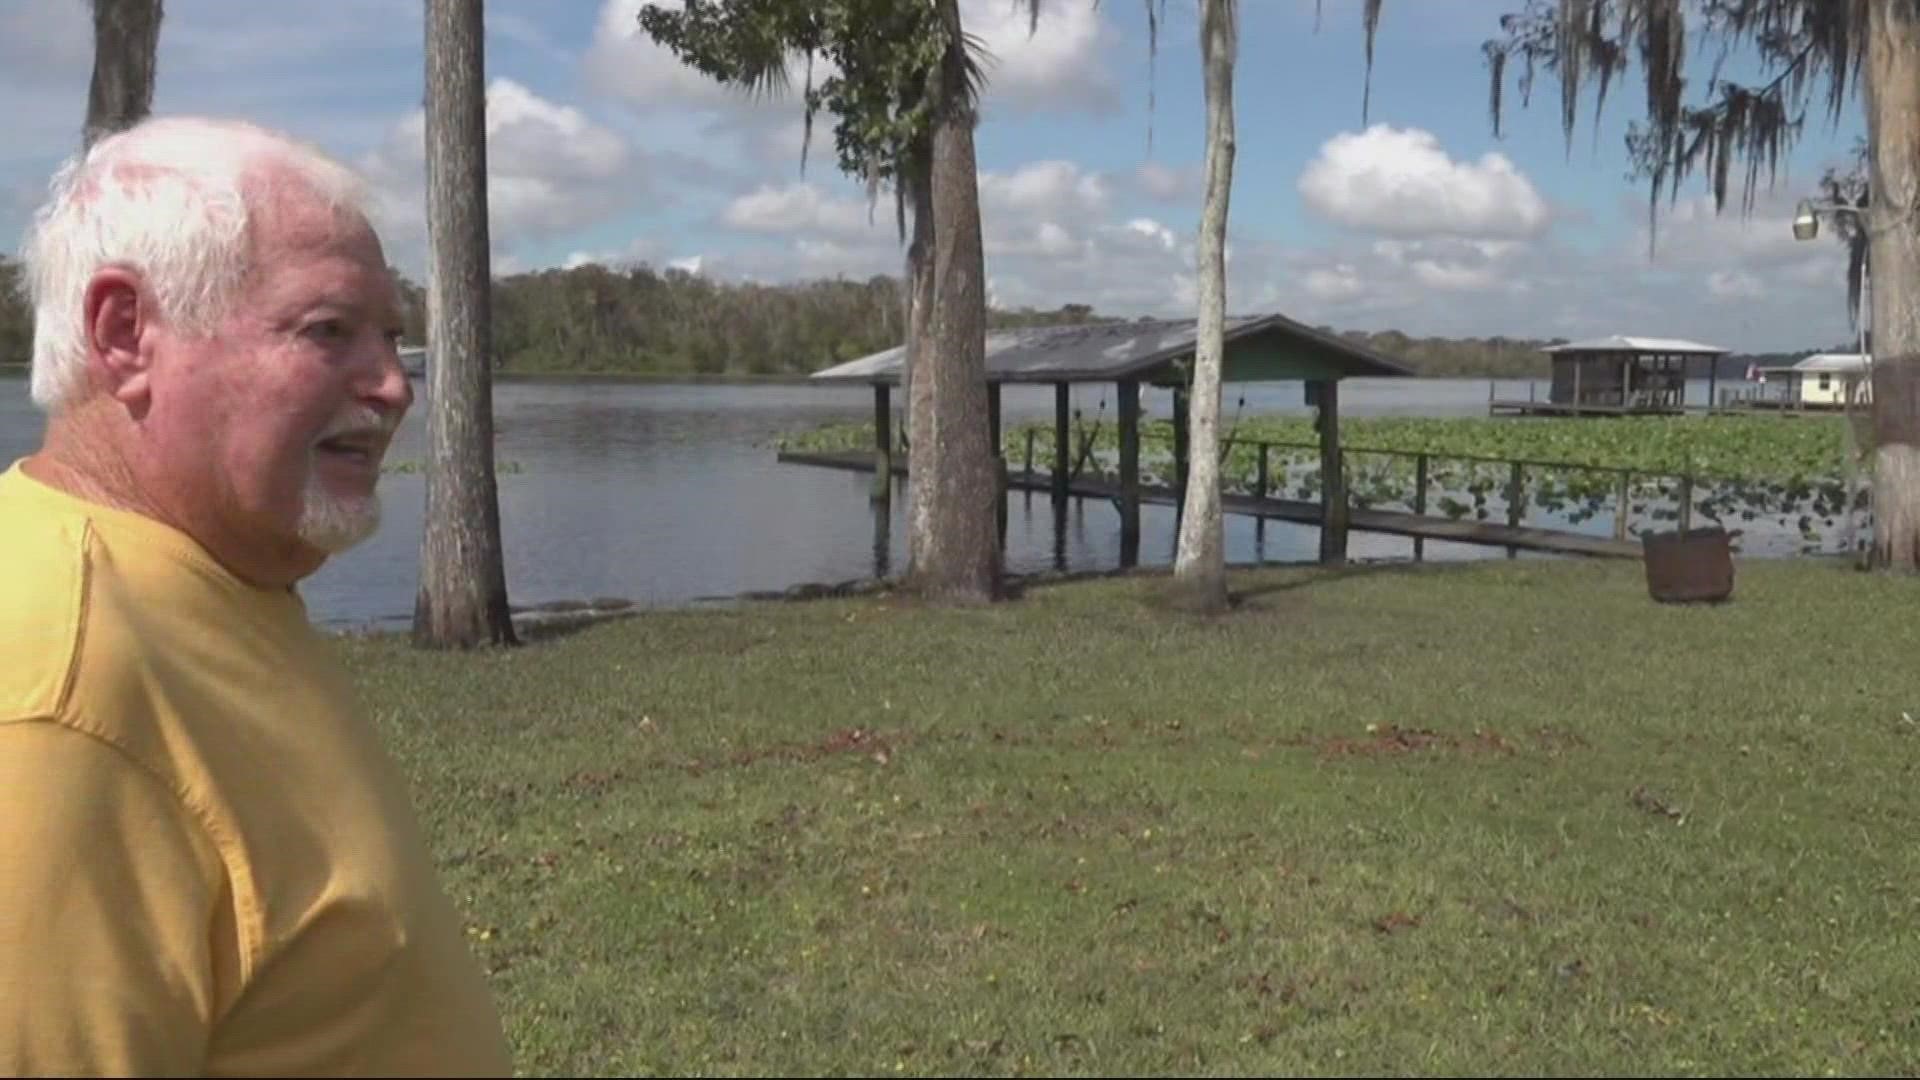 Even a week after the storm, many residents are dealing with flooding.